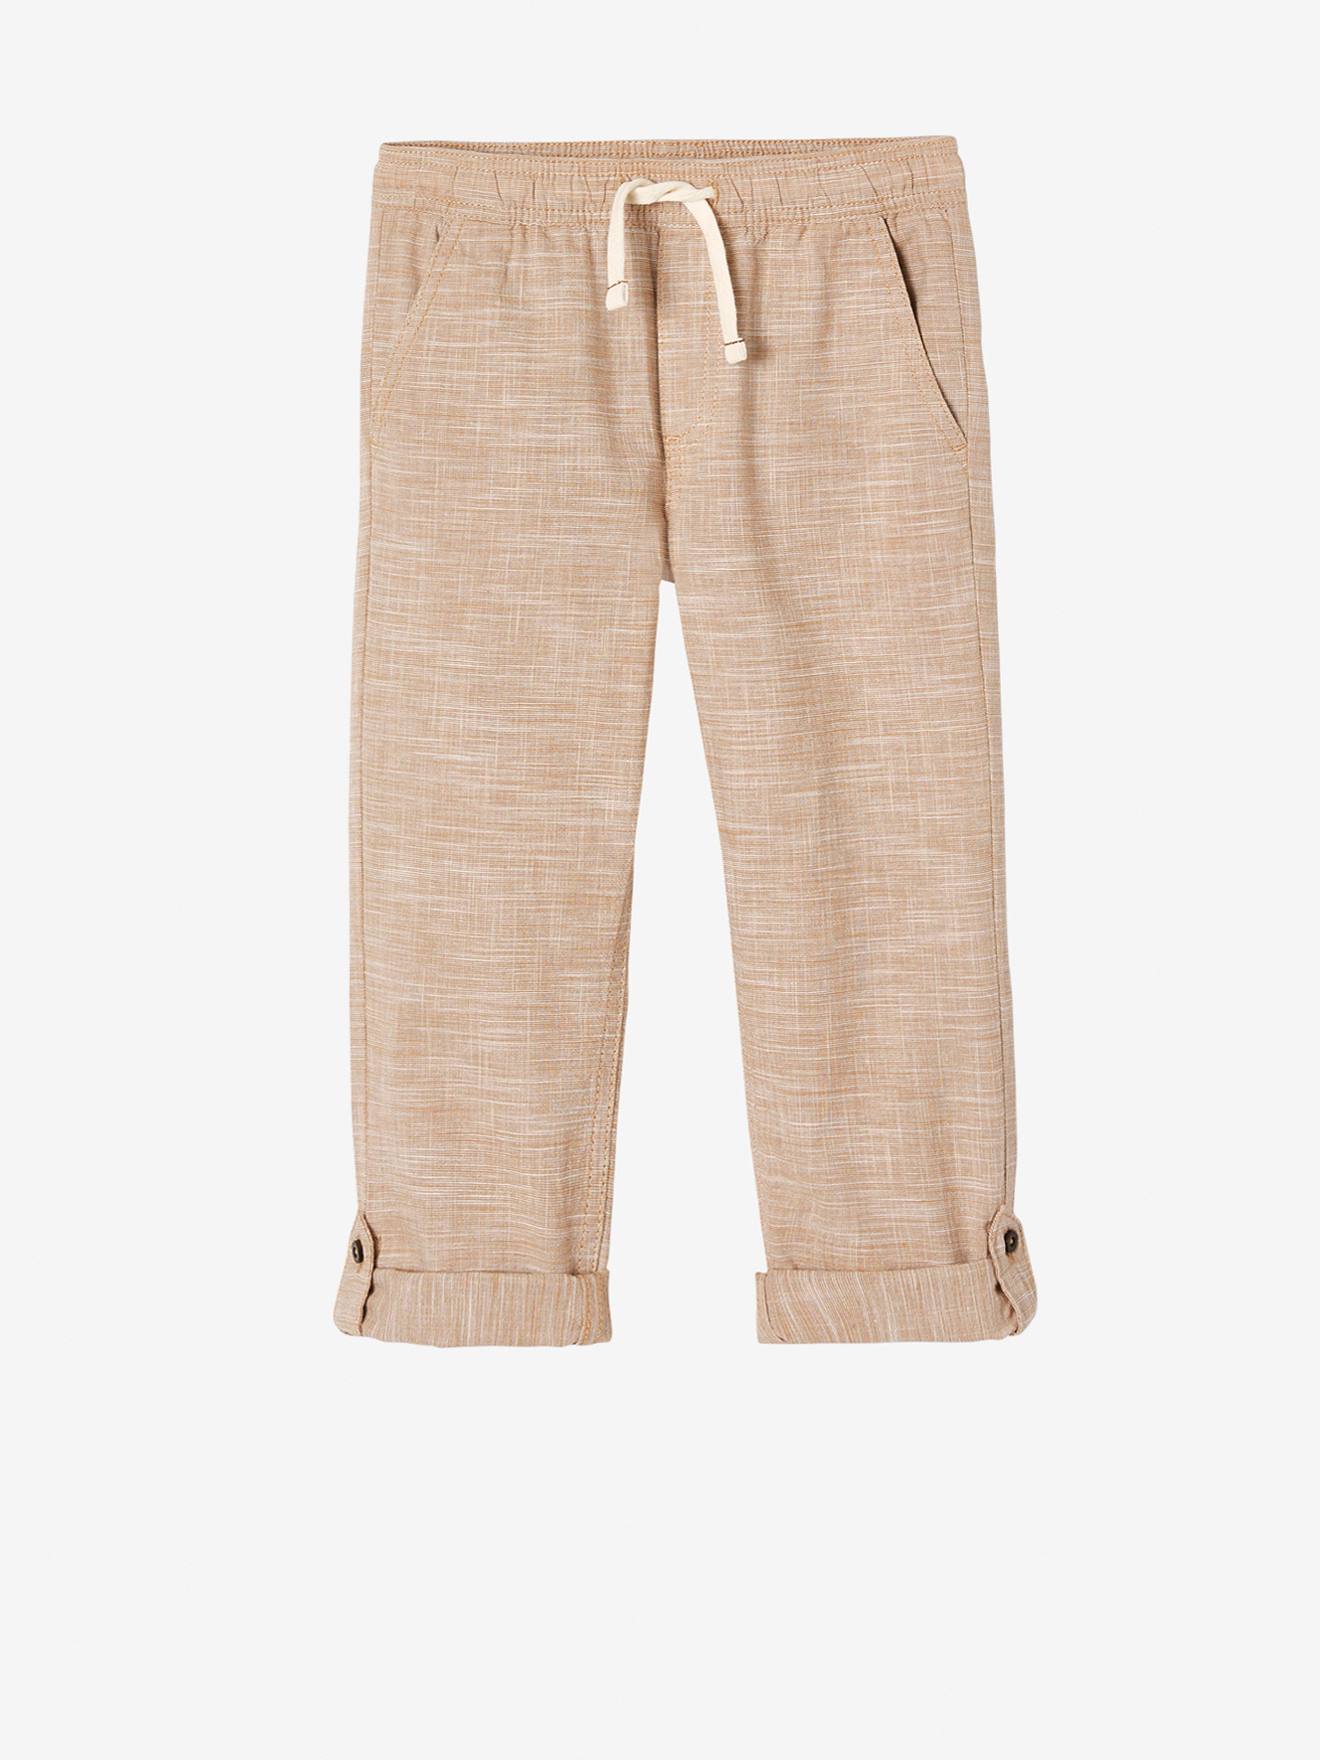 Trousers, Convert into Cropped Trousers, in Lightweight Fabric, for Boys marl beige